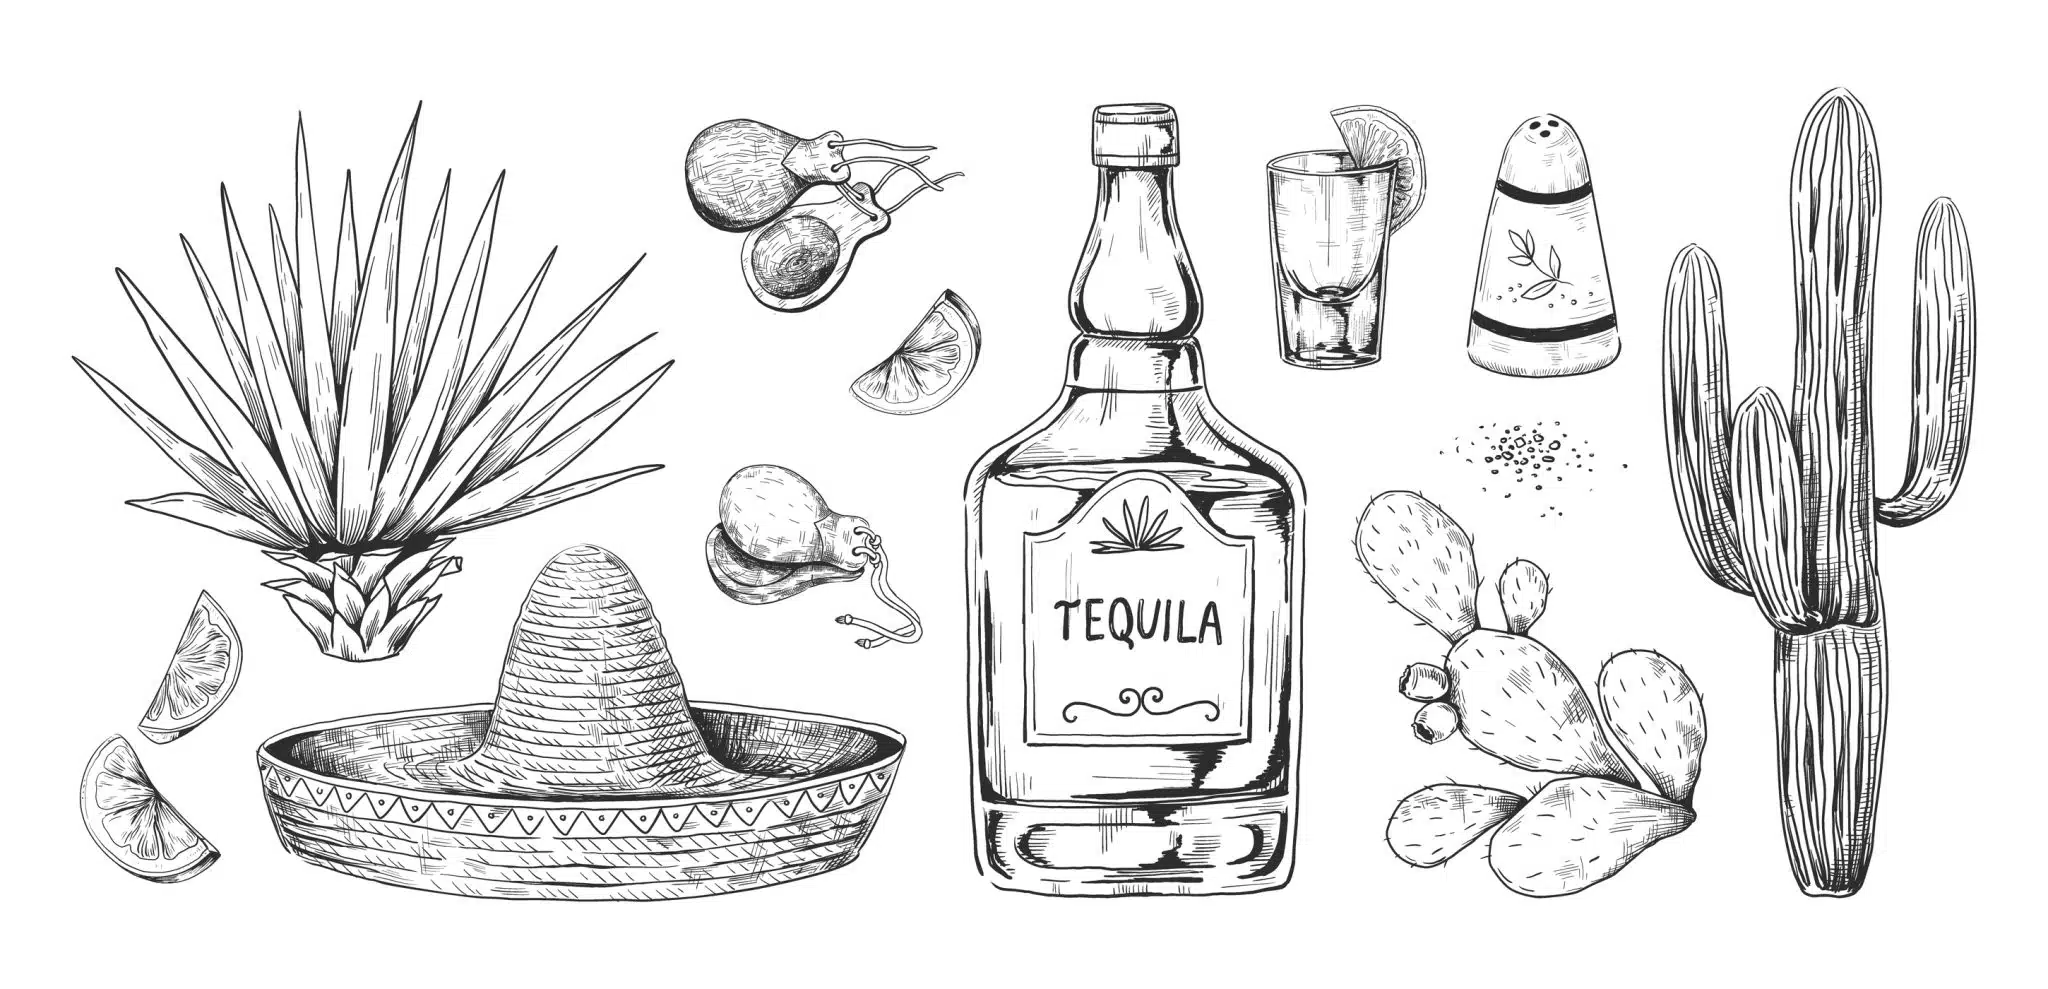 A sketch of tequila and Mexican items including a bottle, shot glass with lime, salt shaker, agave plant, maracas, sombrero, cactus, and prickly pear.